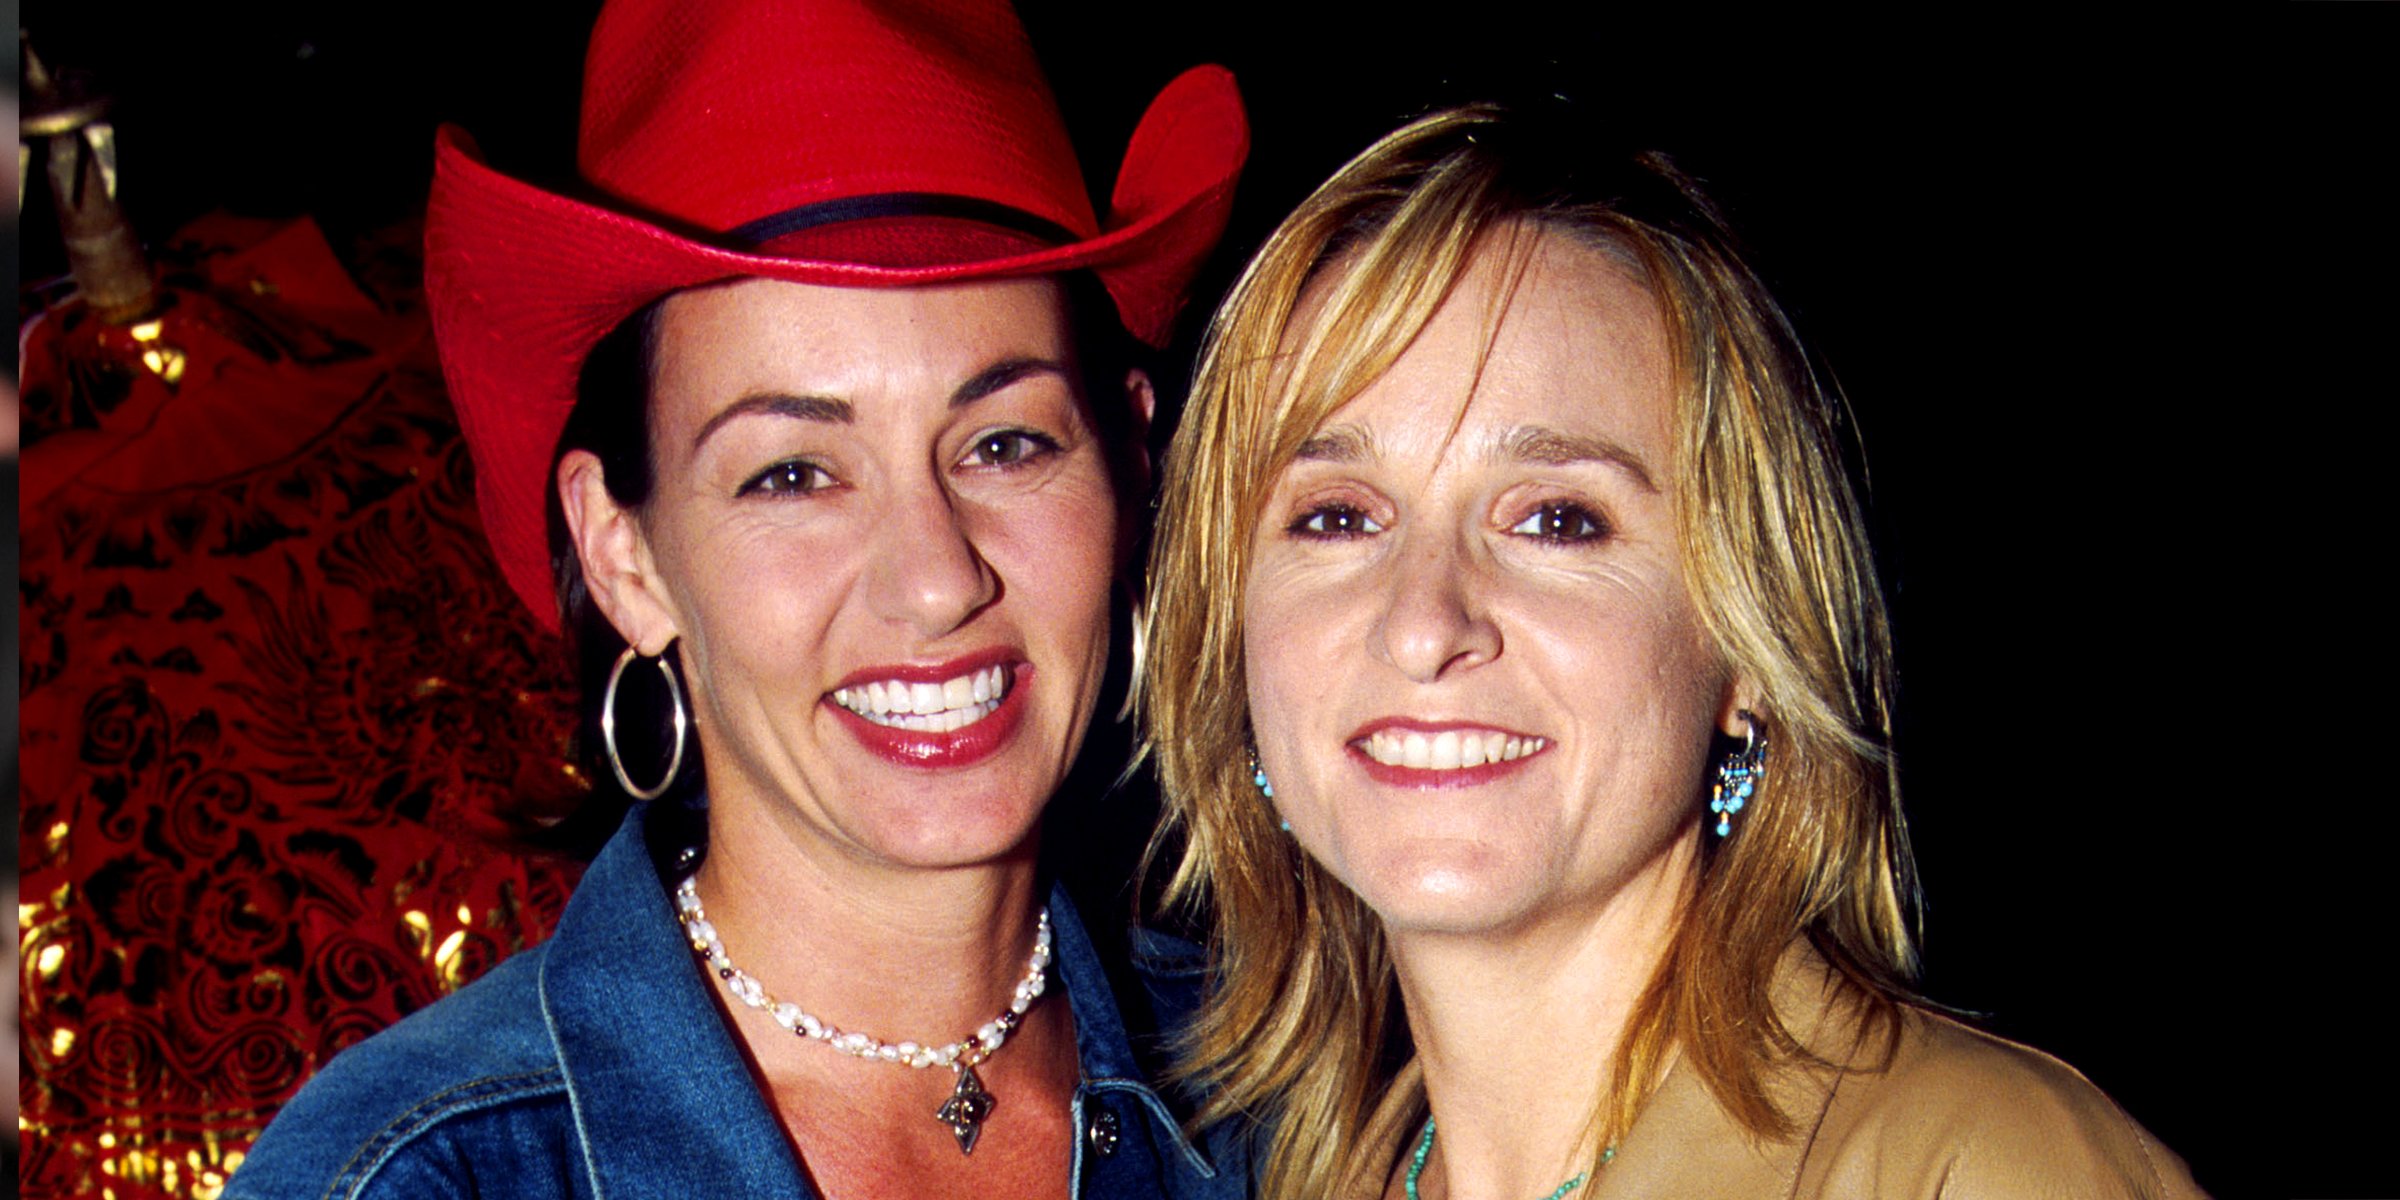 Julie Cypher and Melissa Etheridge | Source: Getty Imges